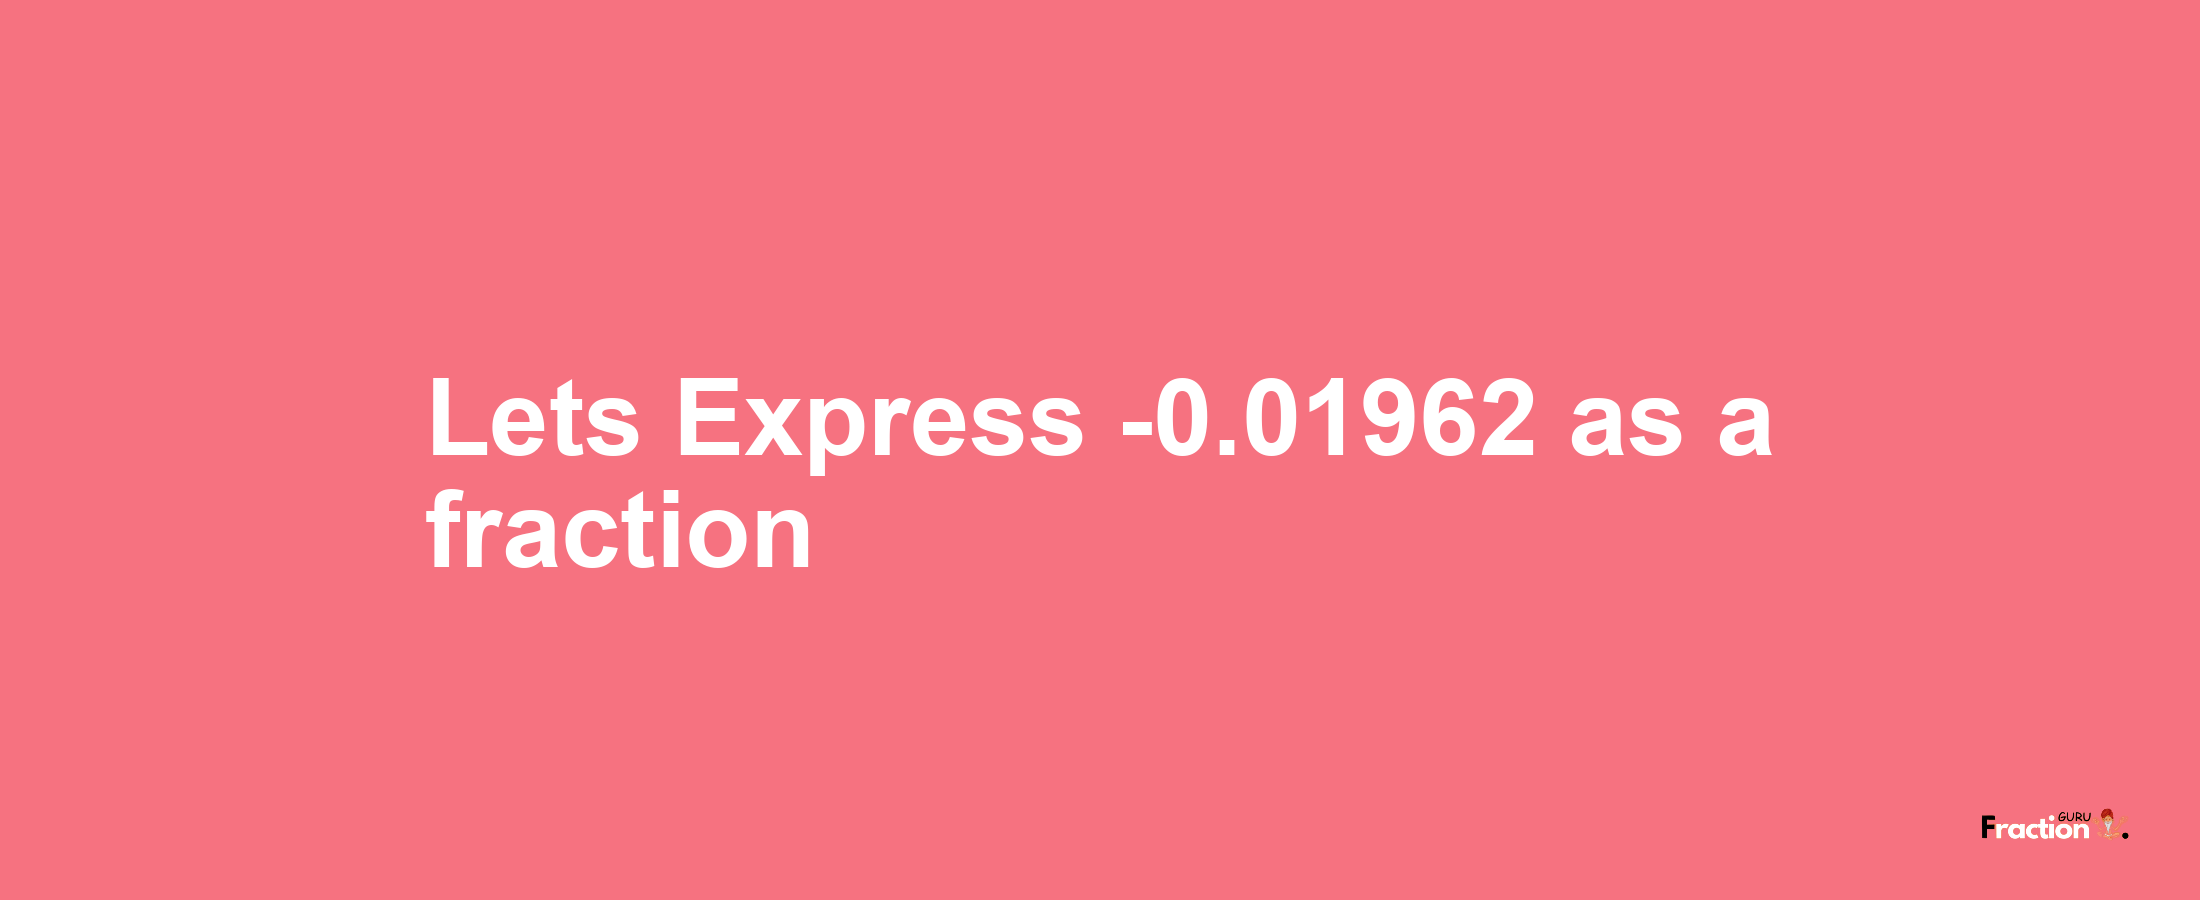 Lets Express -0.01962 as afraction